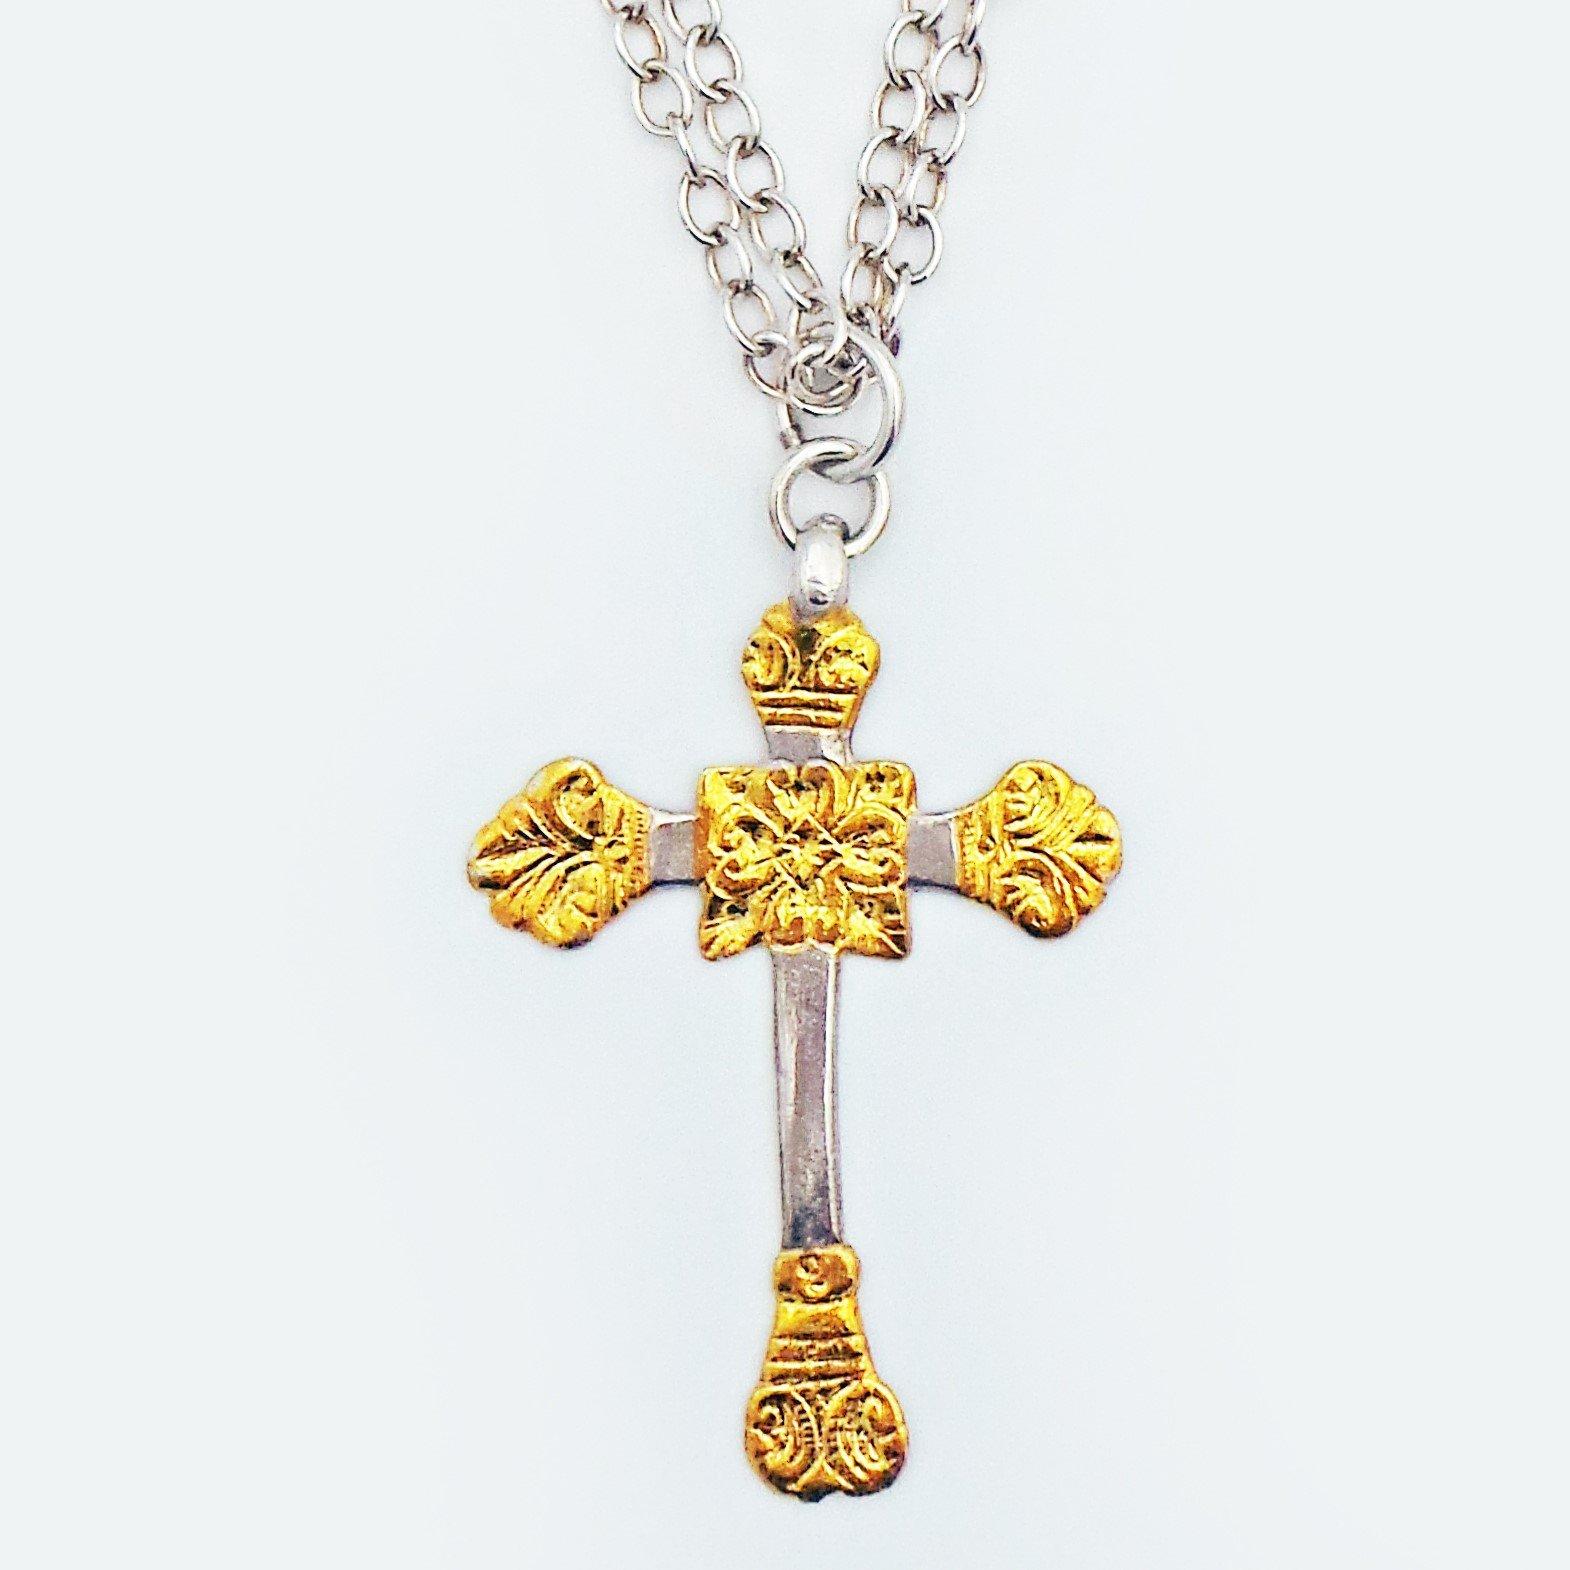 Contemporary Keum-Boo 24 Karat Gold and Sterling Silver Cross Pendant Chain Necklace For Sale